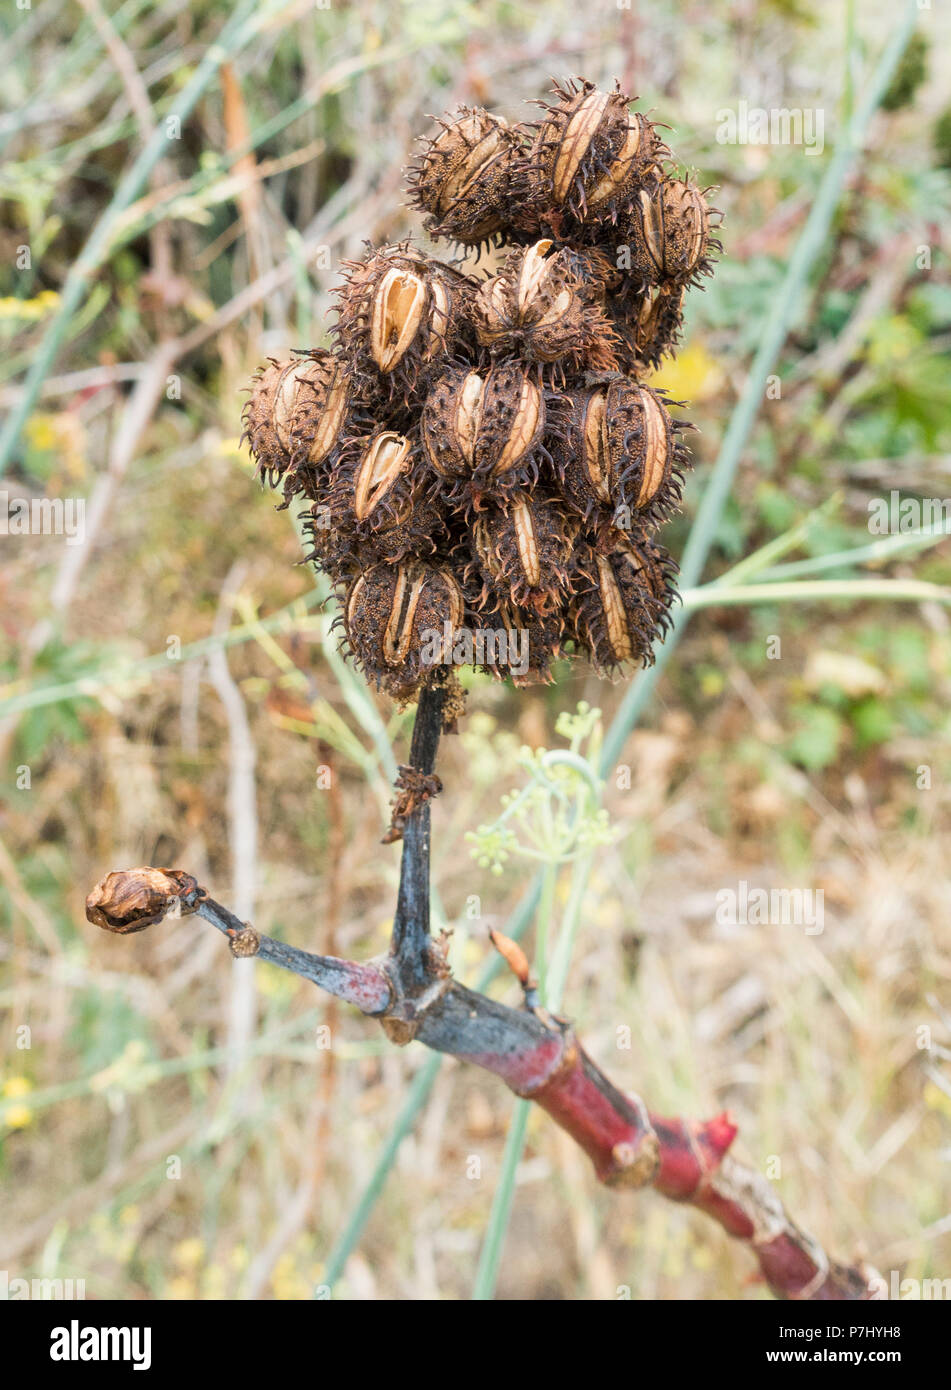 Castor Oil Plant High Resolution Stock Photography and Images - Alamy